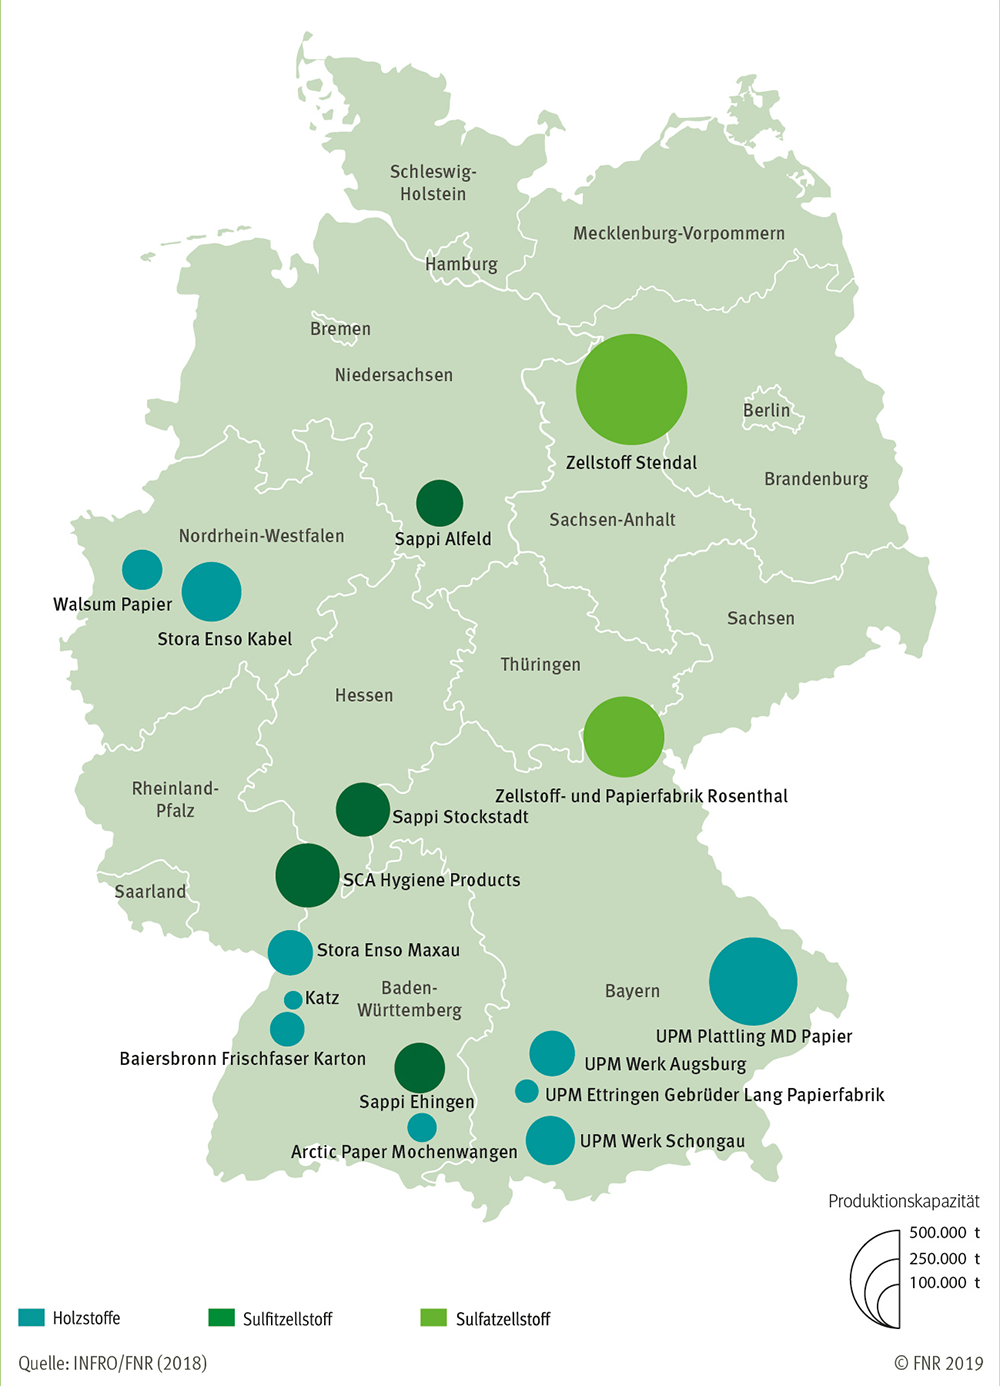 Production sites of the Wood and pulp industry 2015